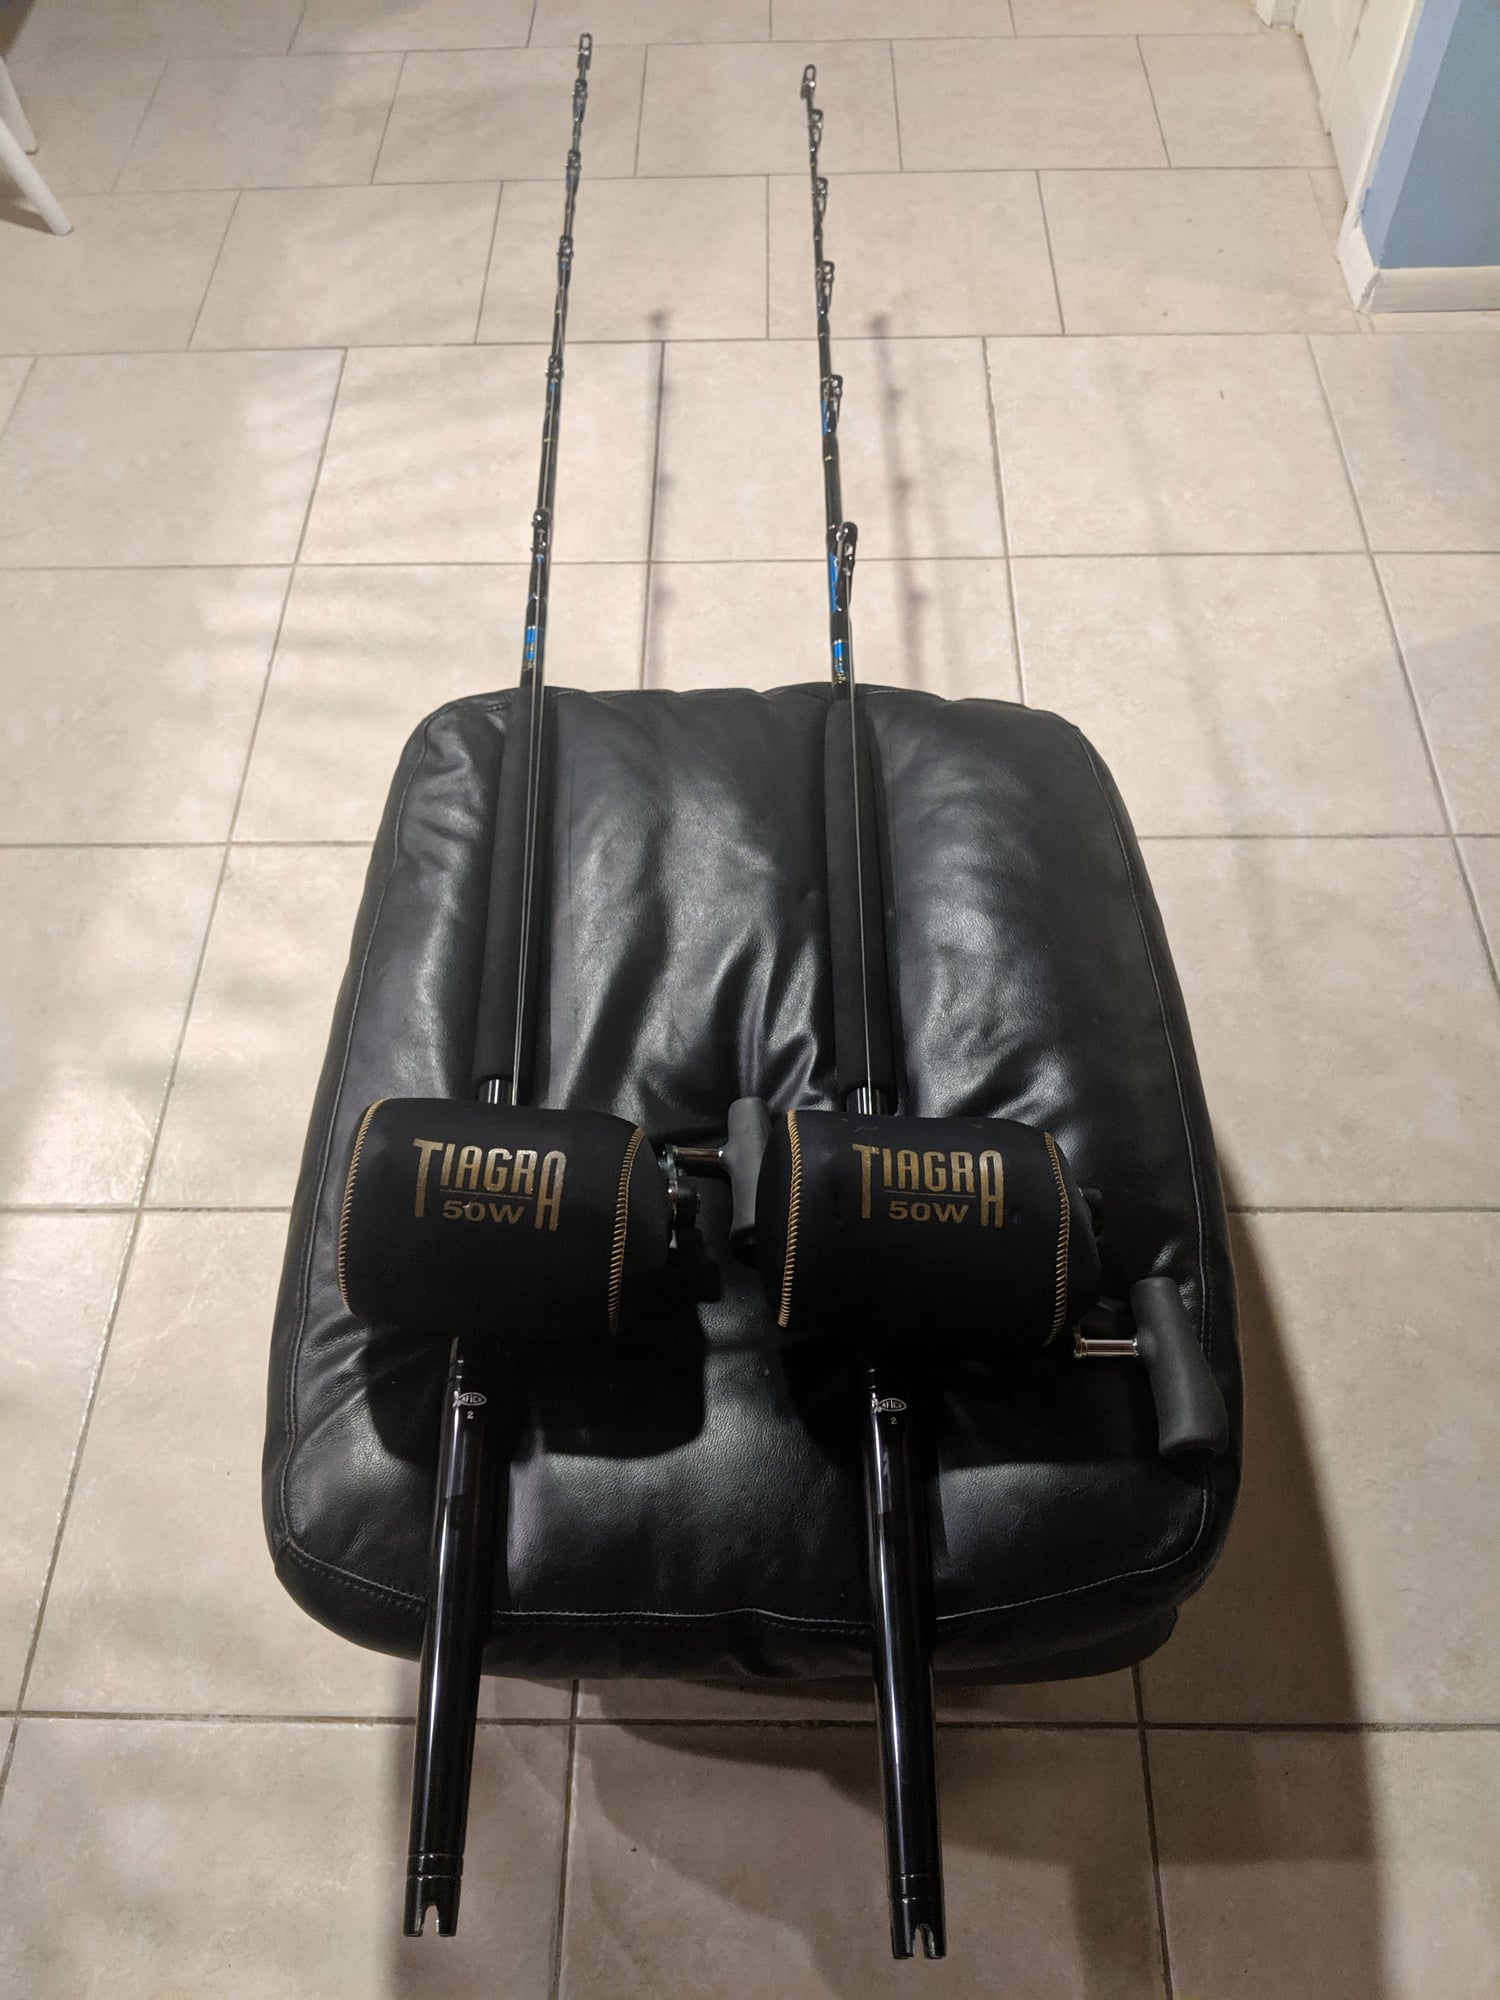 Shimano Tiagra 50W w/ Stand-up Crowder Rod (Pair) - The Hull Truth - Boating  and Fishing Forum